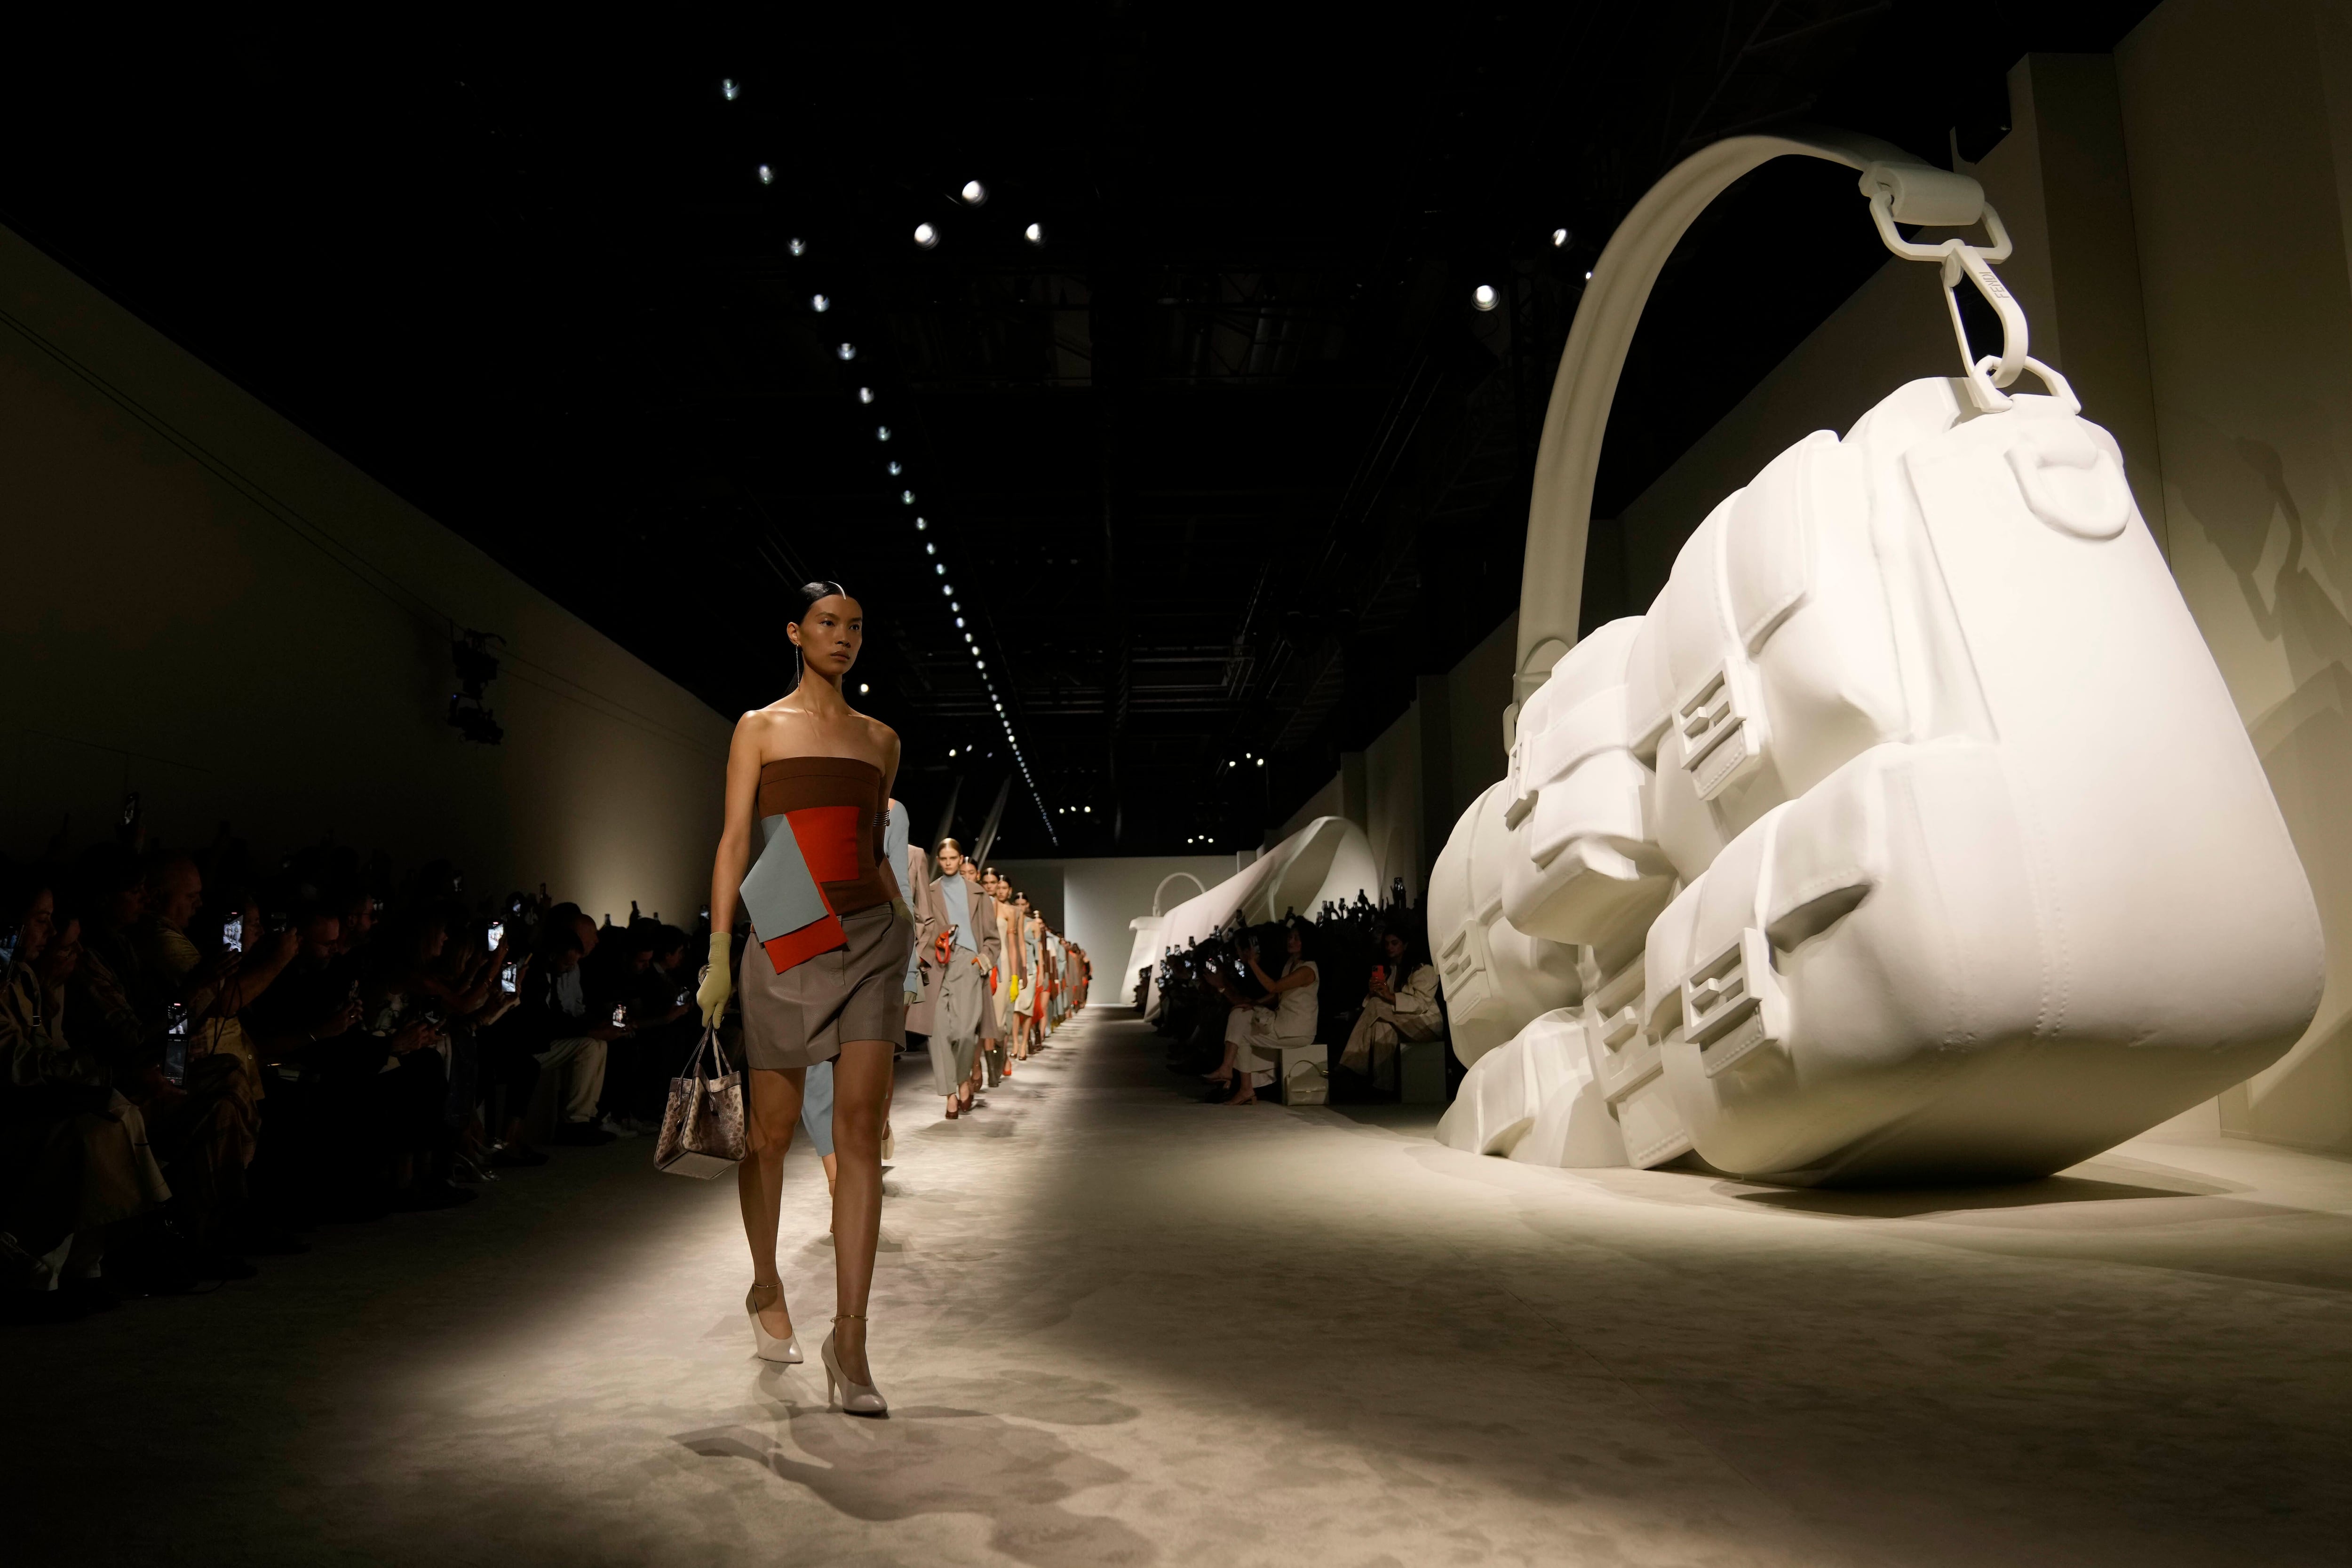 FENDI Women's and Men's Spring/Summer 2021 Collections - Fashion Trendsetter